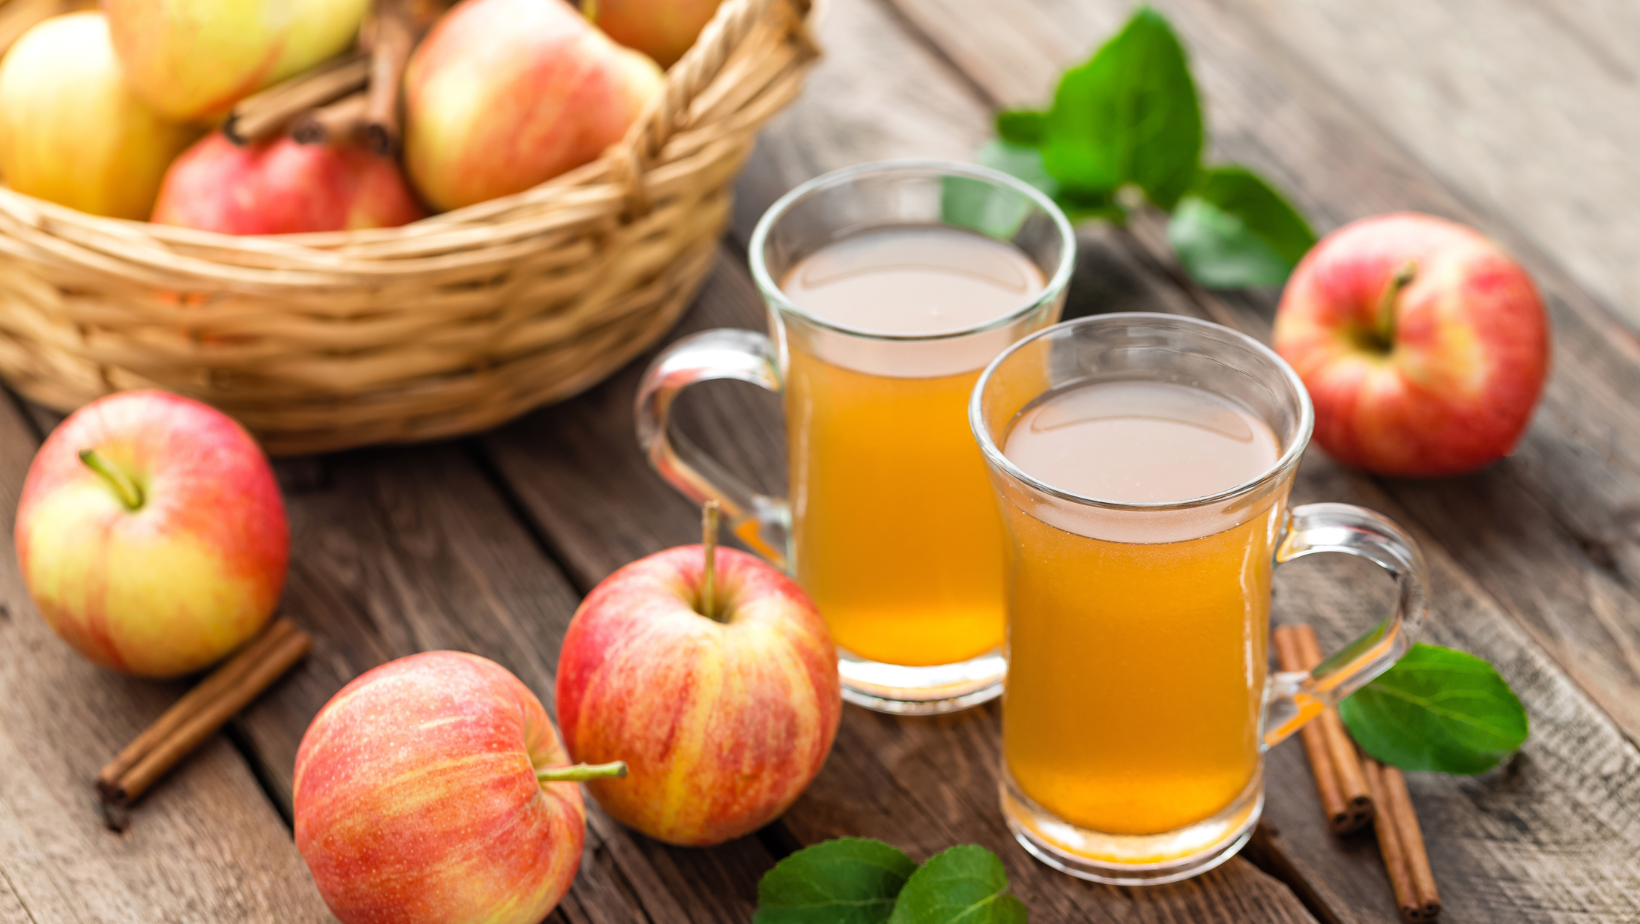 What is Apple Cider | two glasses of apple cider on a pic-nic table next to a woven basket of honeycrisp apples. there are a few apples on the table alongside cinnamon sticks and apple leaves